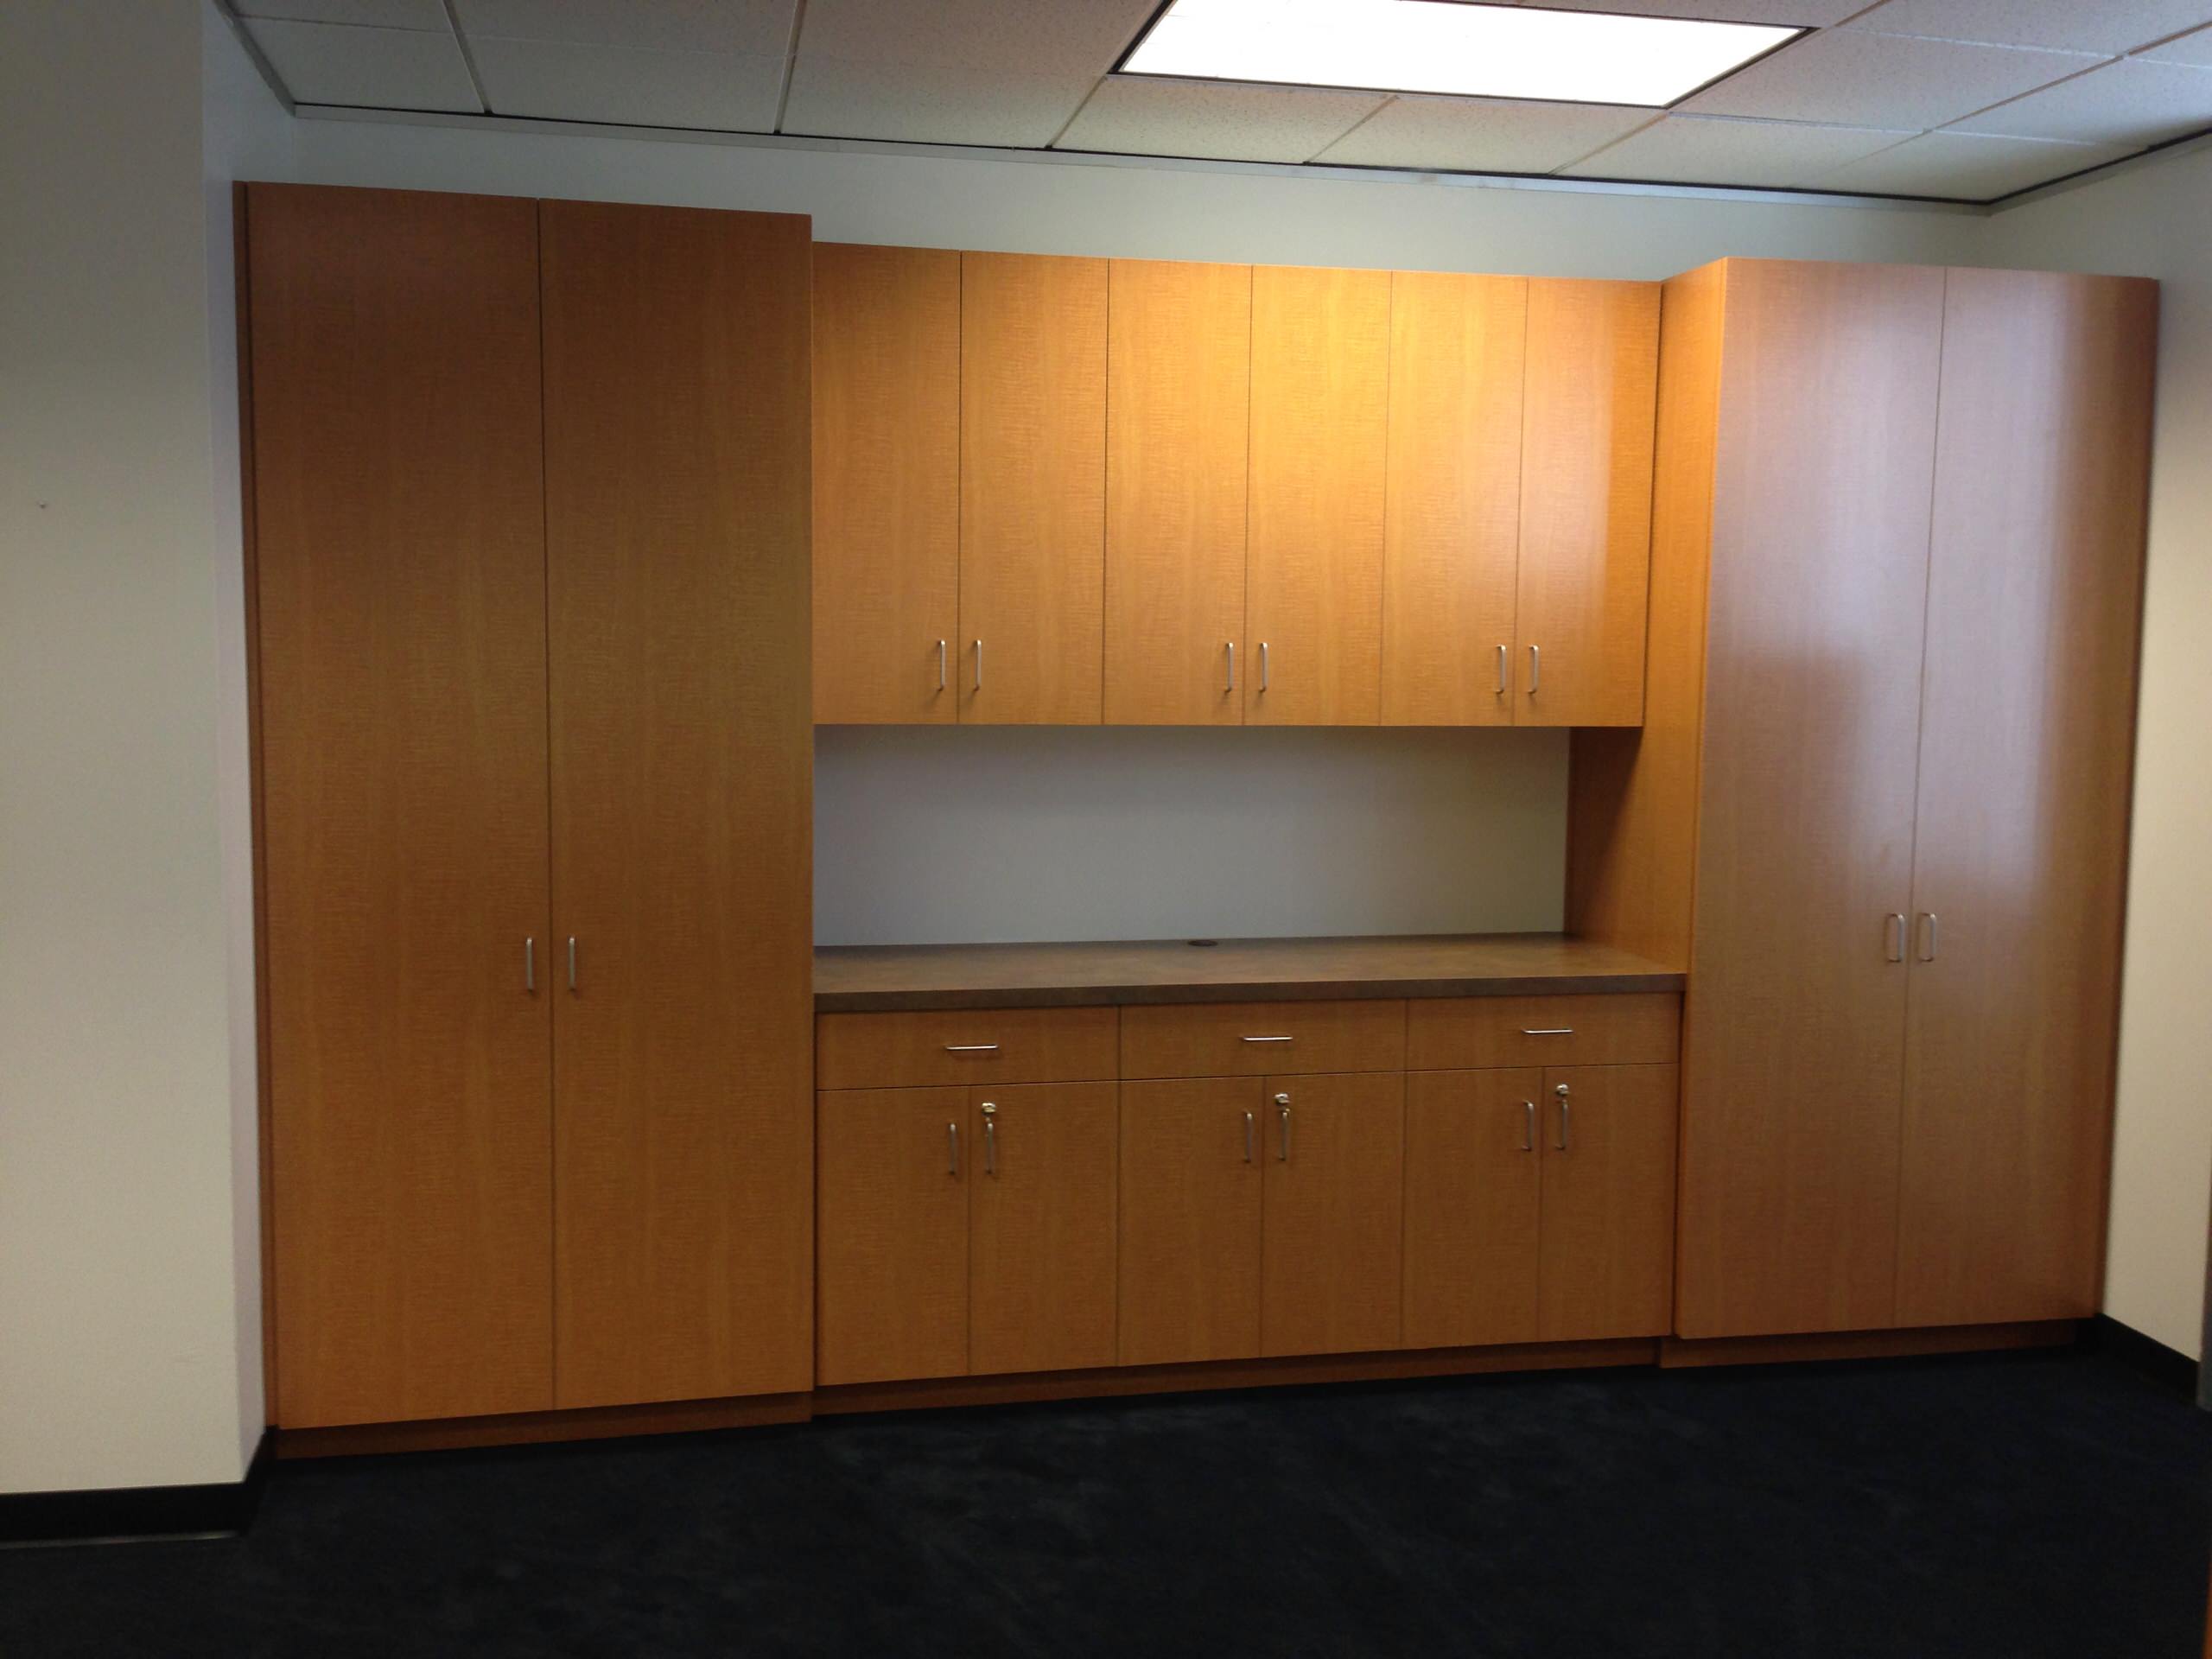 Conference Room Cabinetry - Commerce